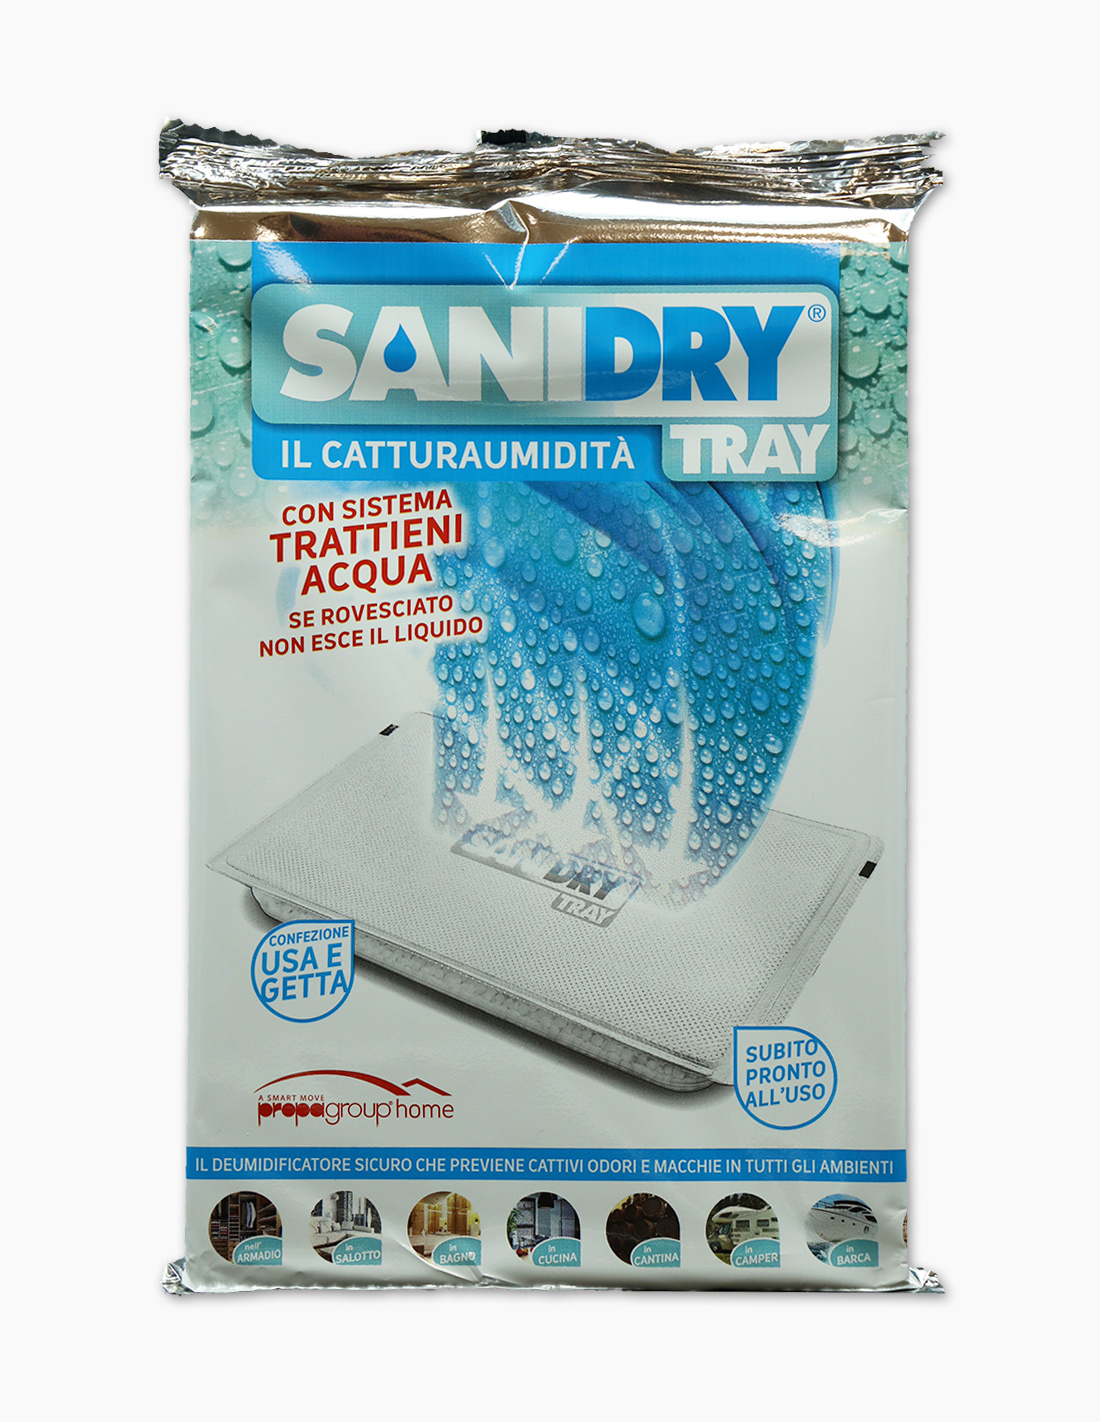 Moisture absorbing packets. Home moisture desiccant. Sanidry. Desiccant tray.  Sercalia